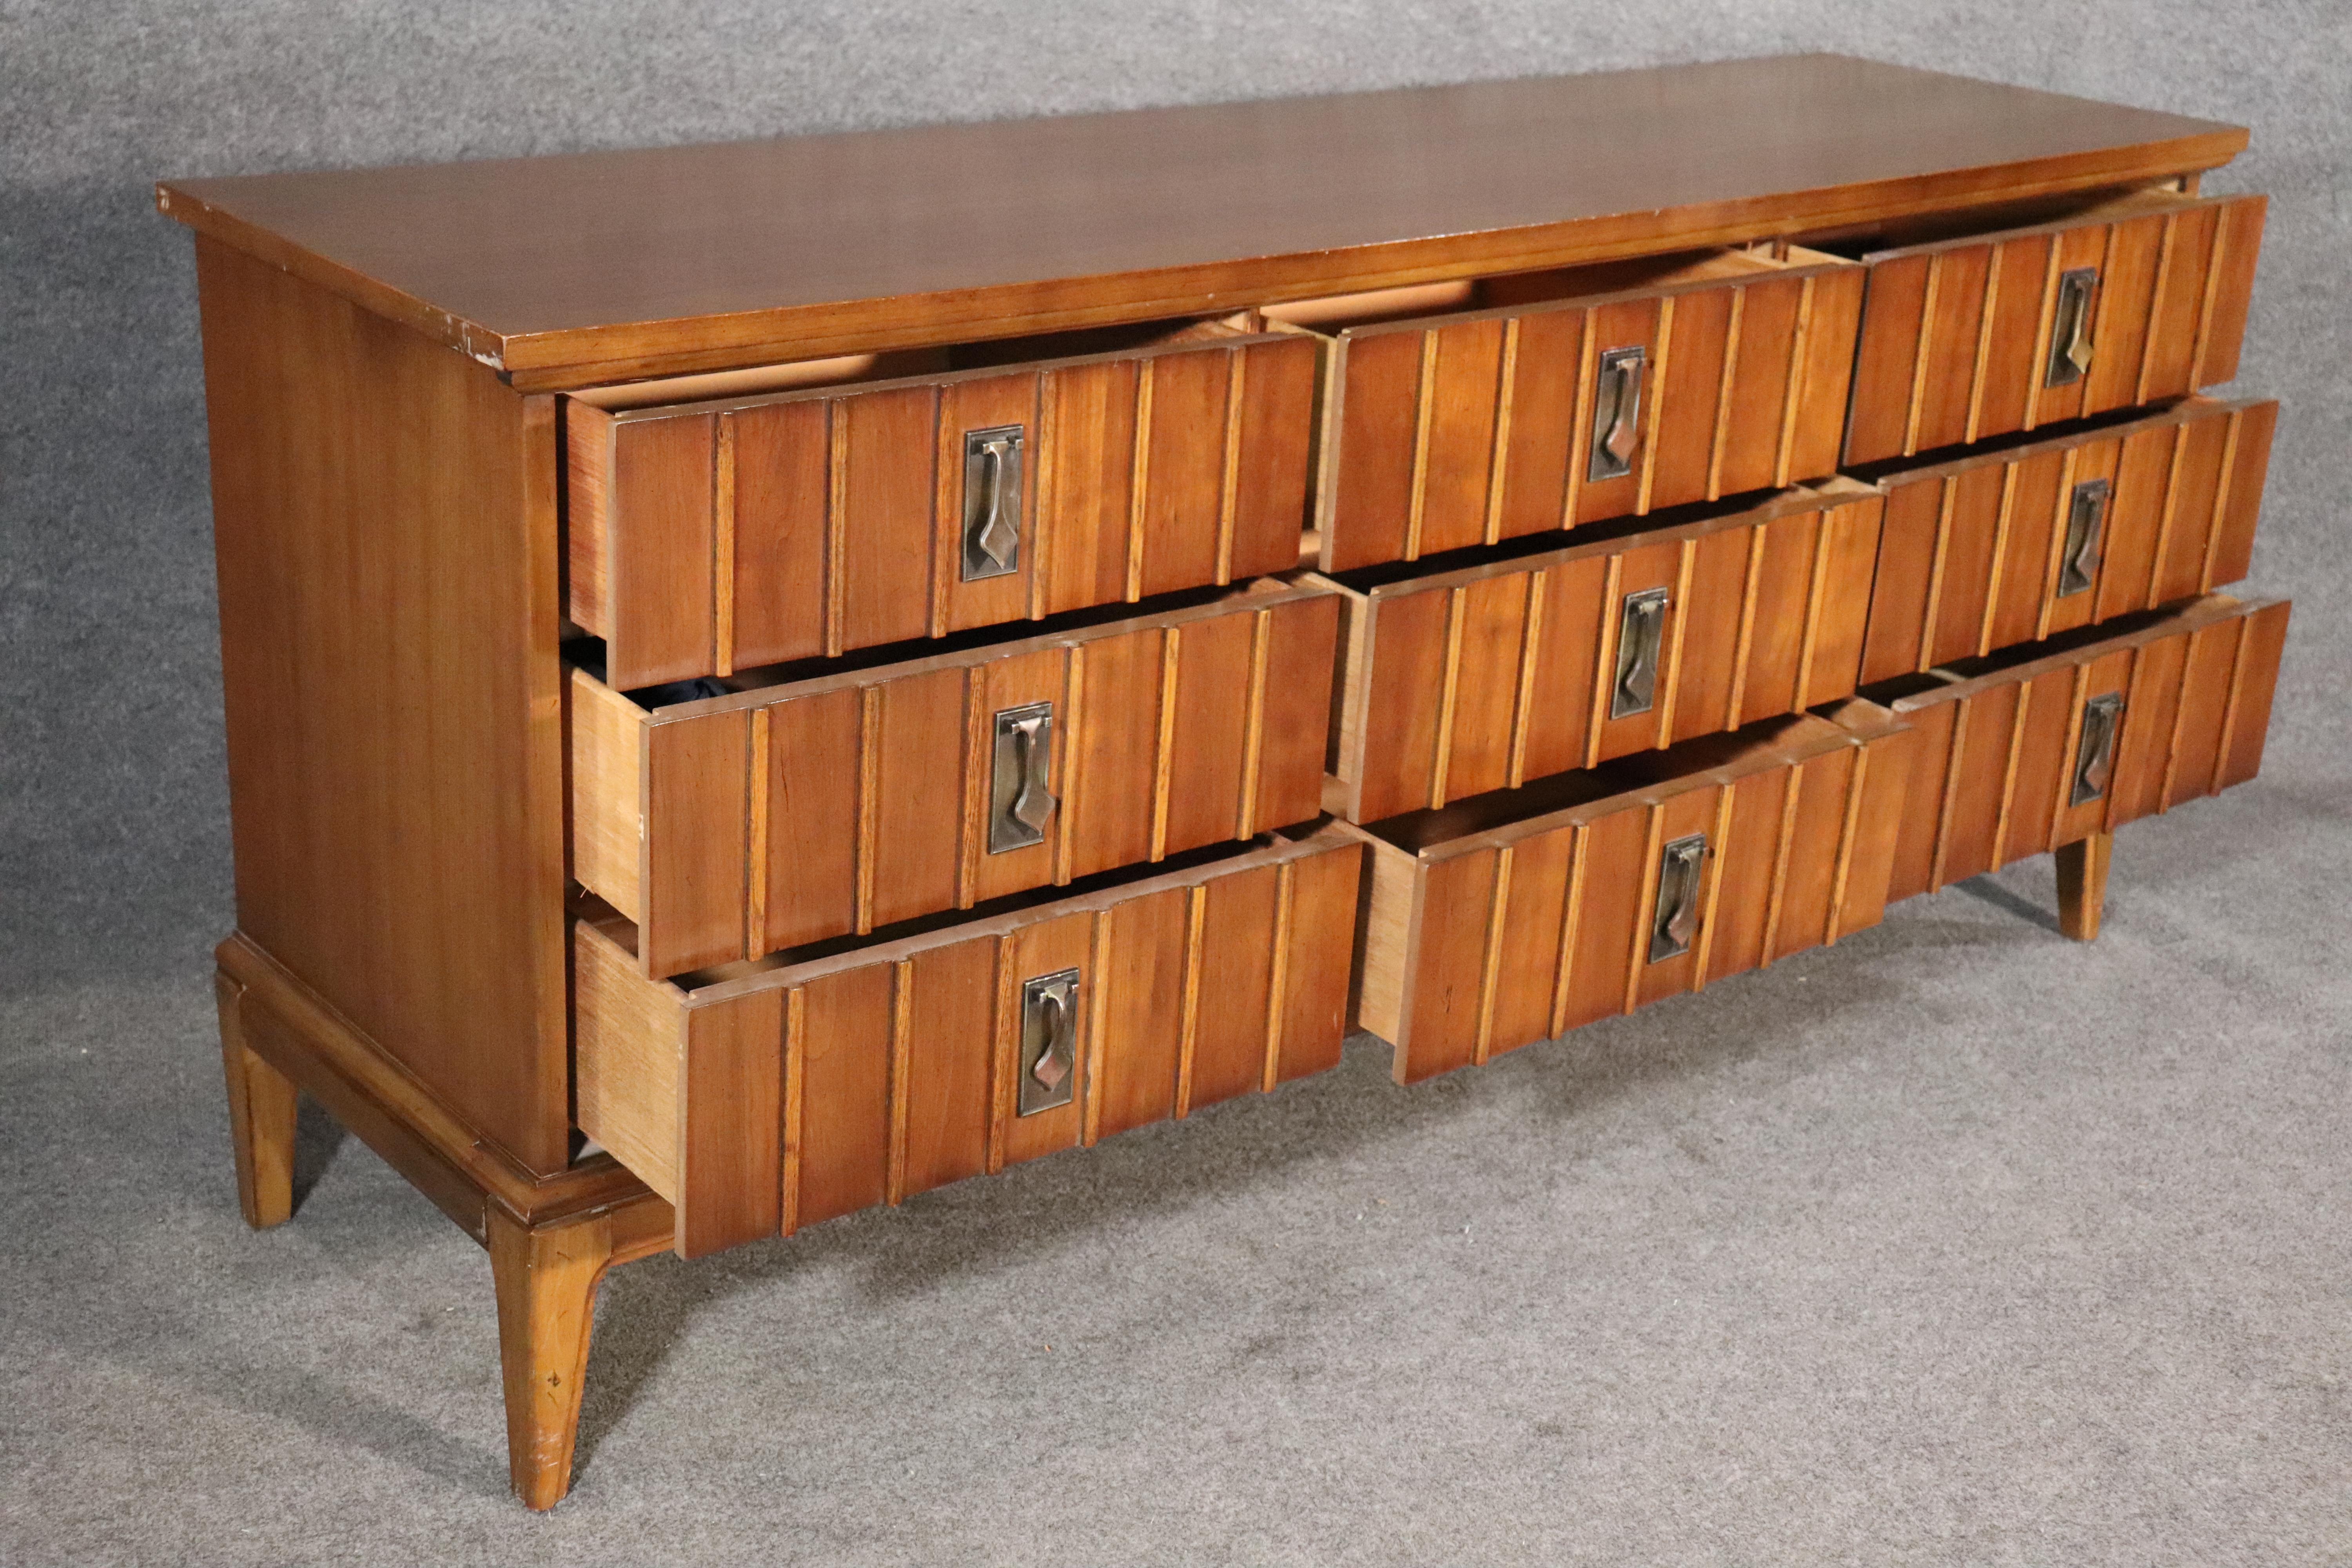 Mid-Century Modern long chest of drawers by Dixie Furniture. All walnut grain with metal spade handles.